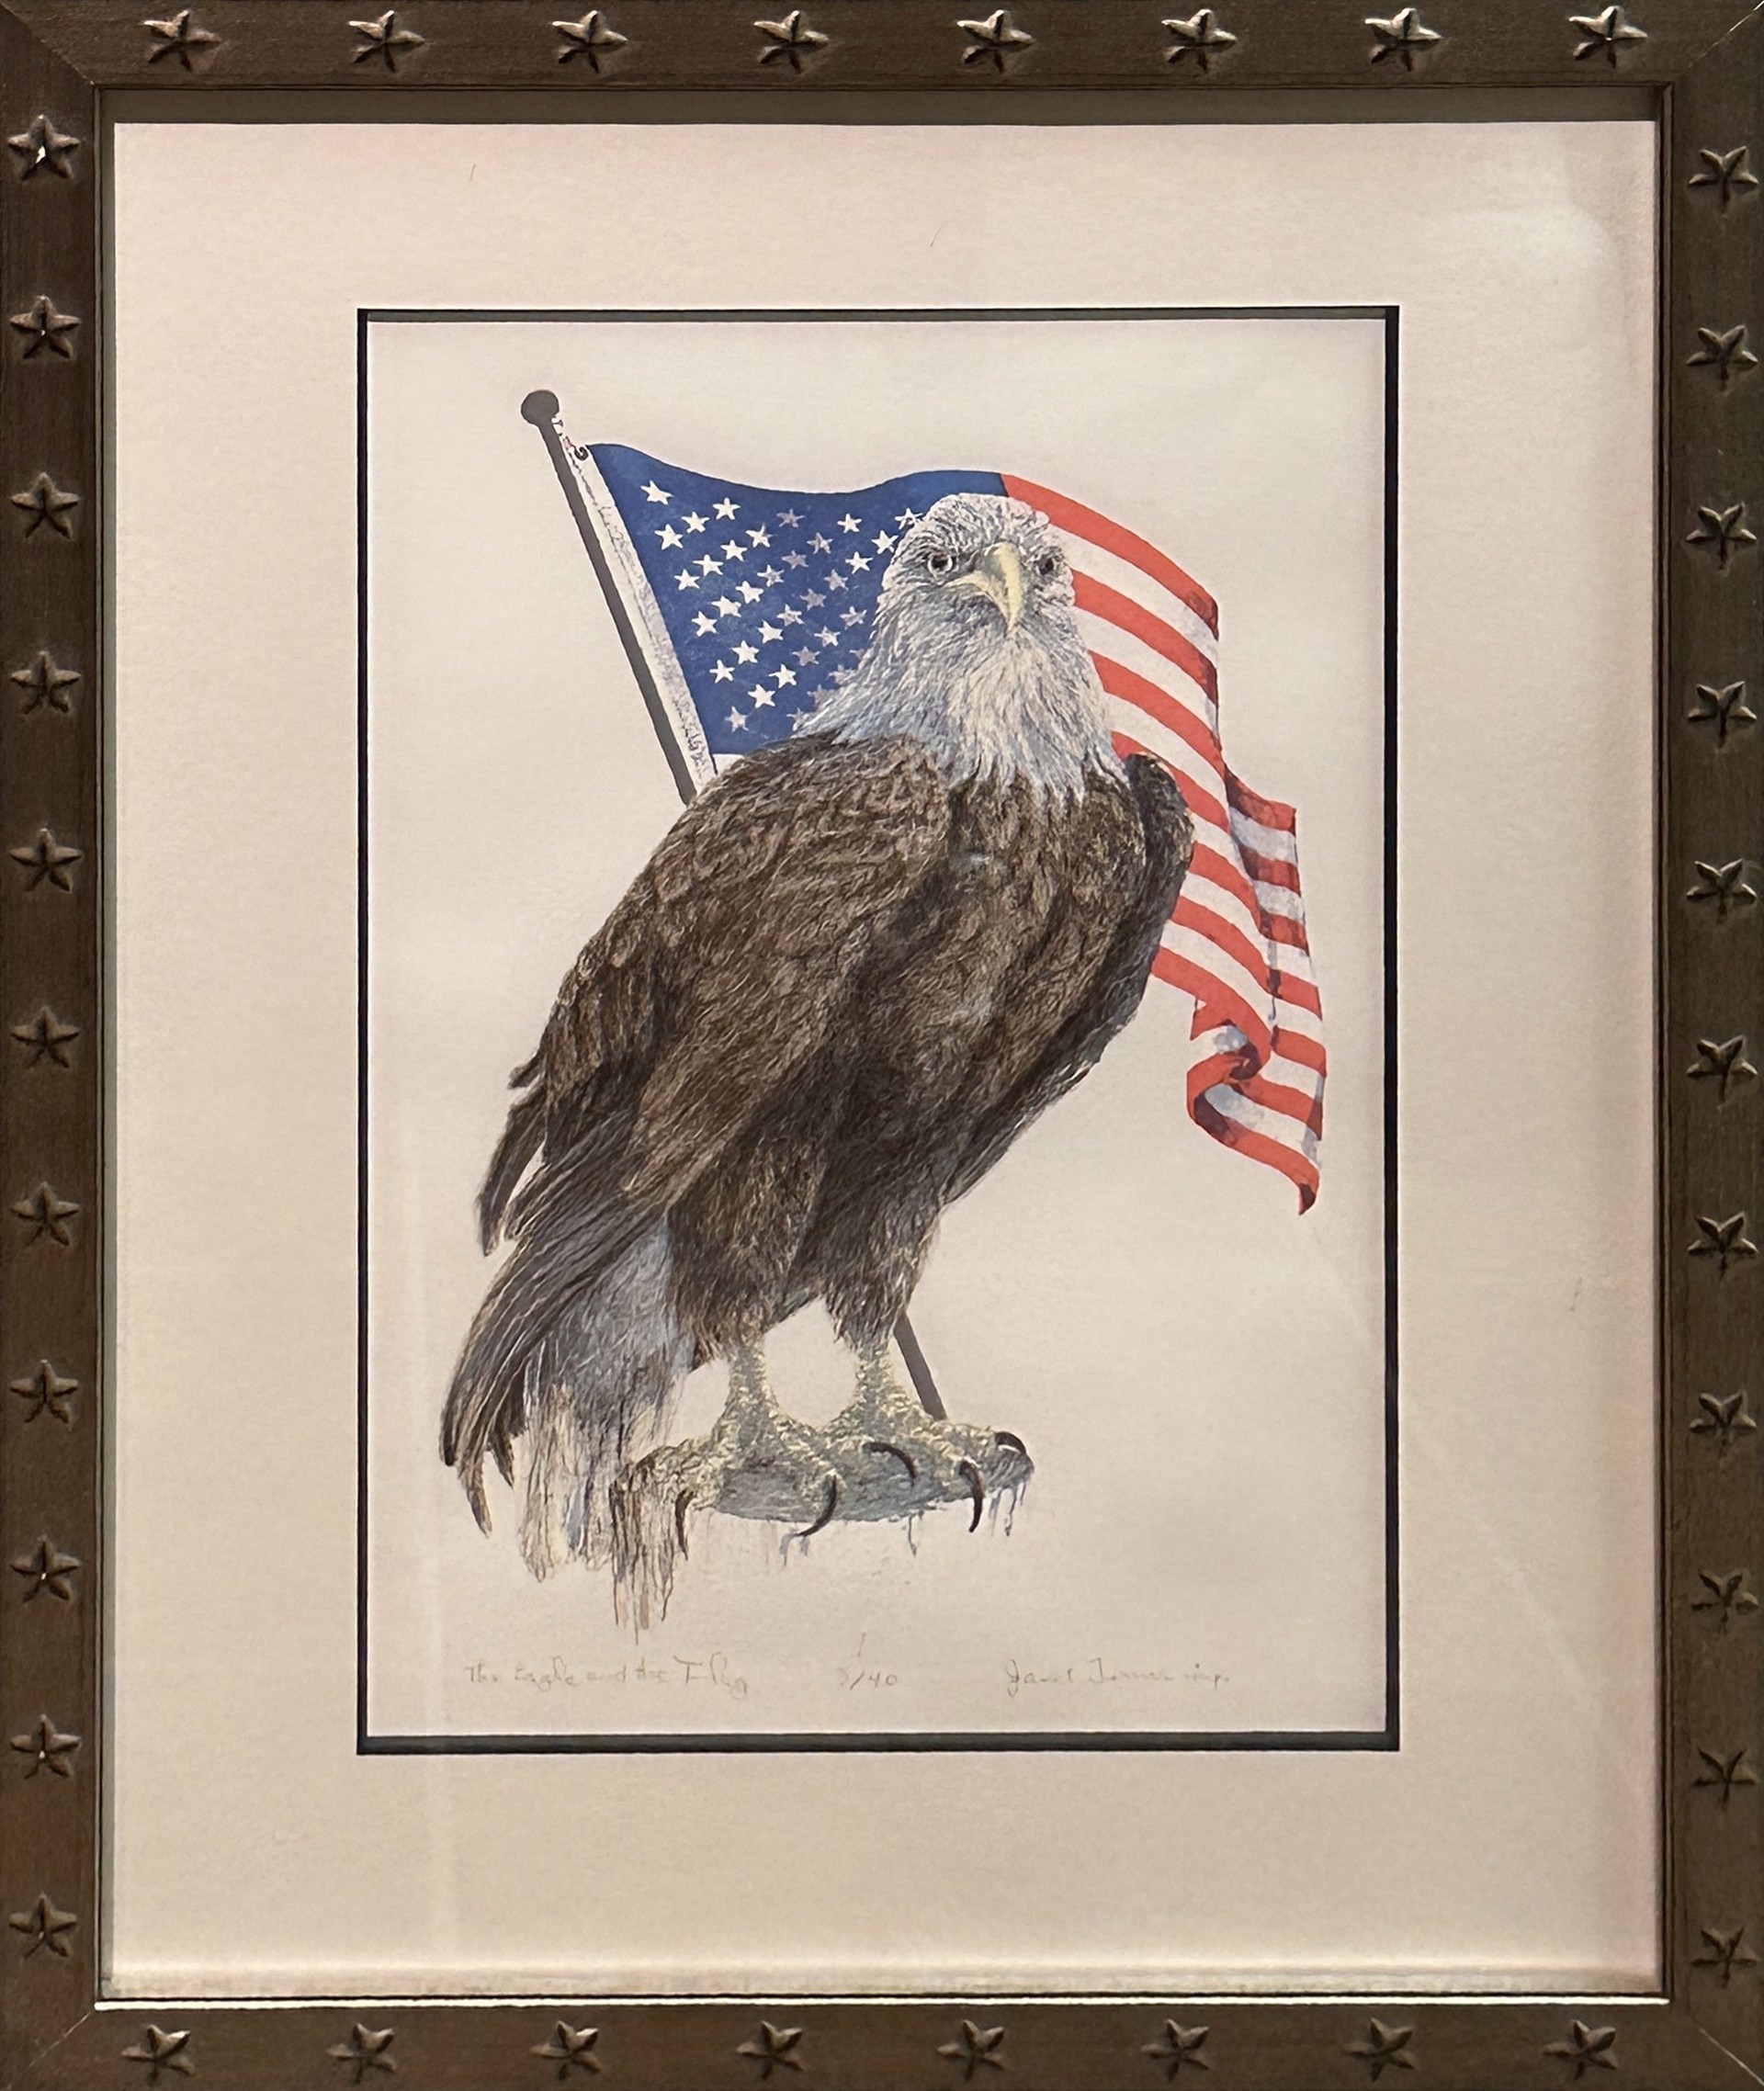 The Eagle and The Flag by Janet Turner